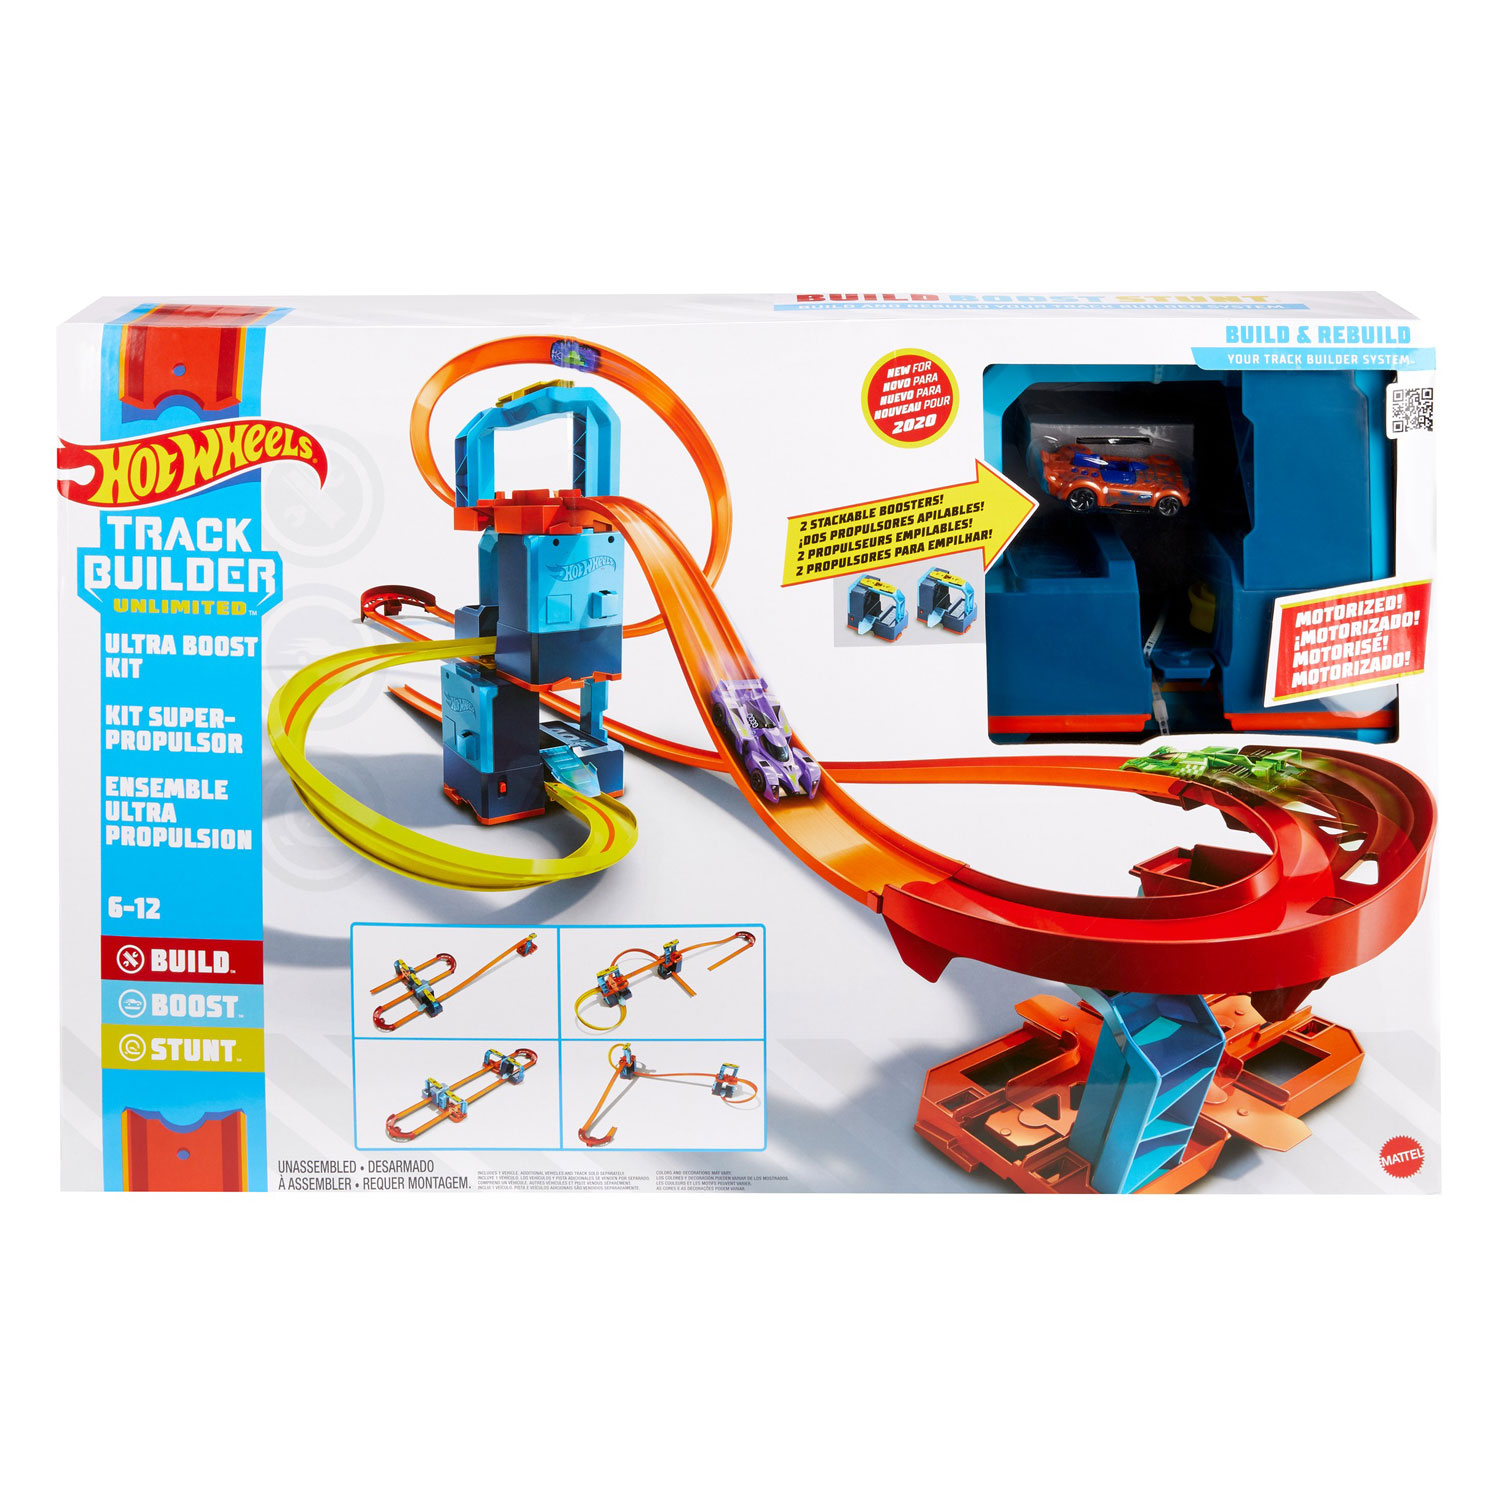 Zuigeling kans Artiest Hot Wheels Track Builder - Ultra Boost Kit | Thimble Toys